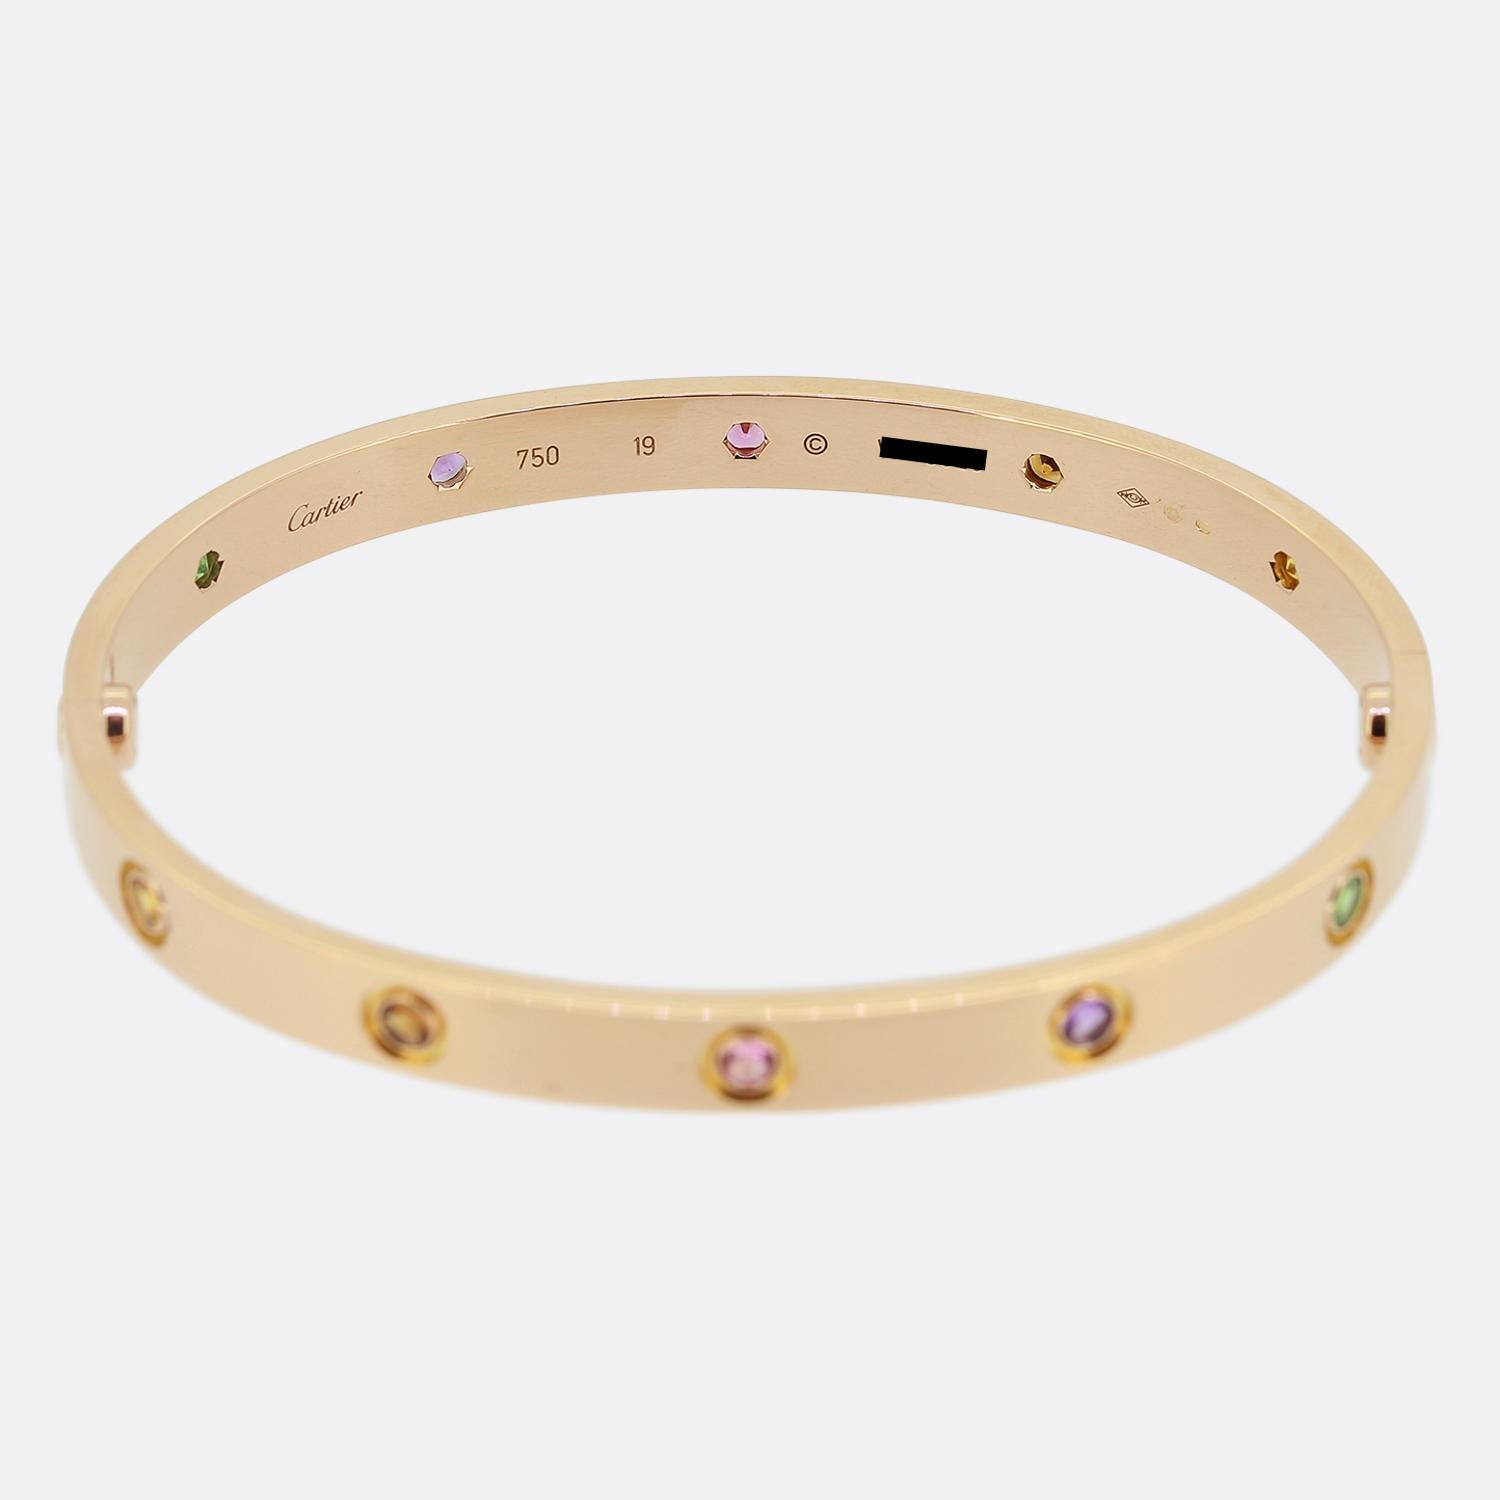 Here we have an 18ct rose gold bangle from the world renowned luxury jewellery house of Cartier. This bangle forms part of the LOVE collection and features ten coloured gemstones alongside the iconic screw motif including: amethysts, rose and yellow